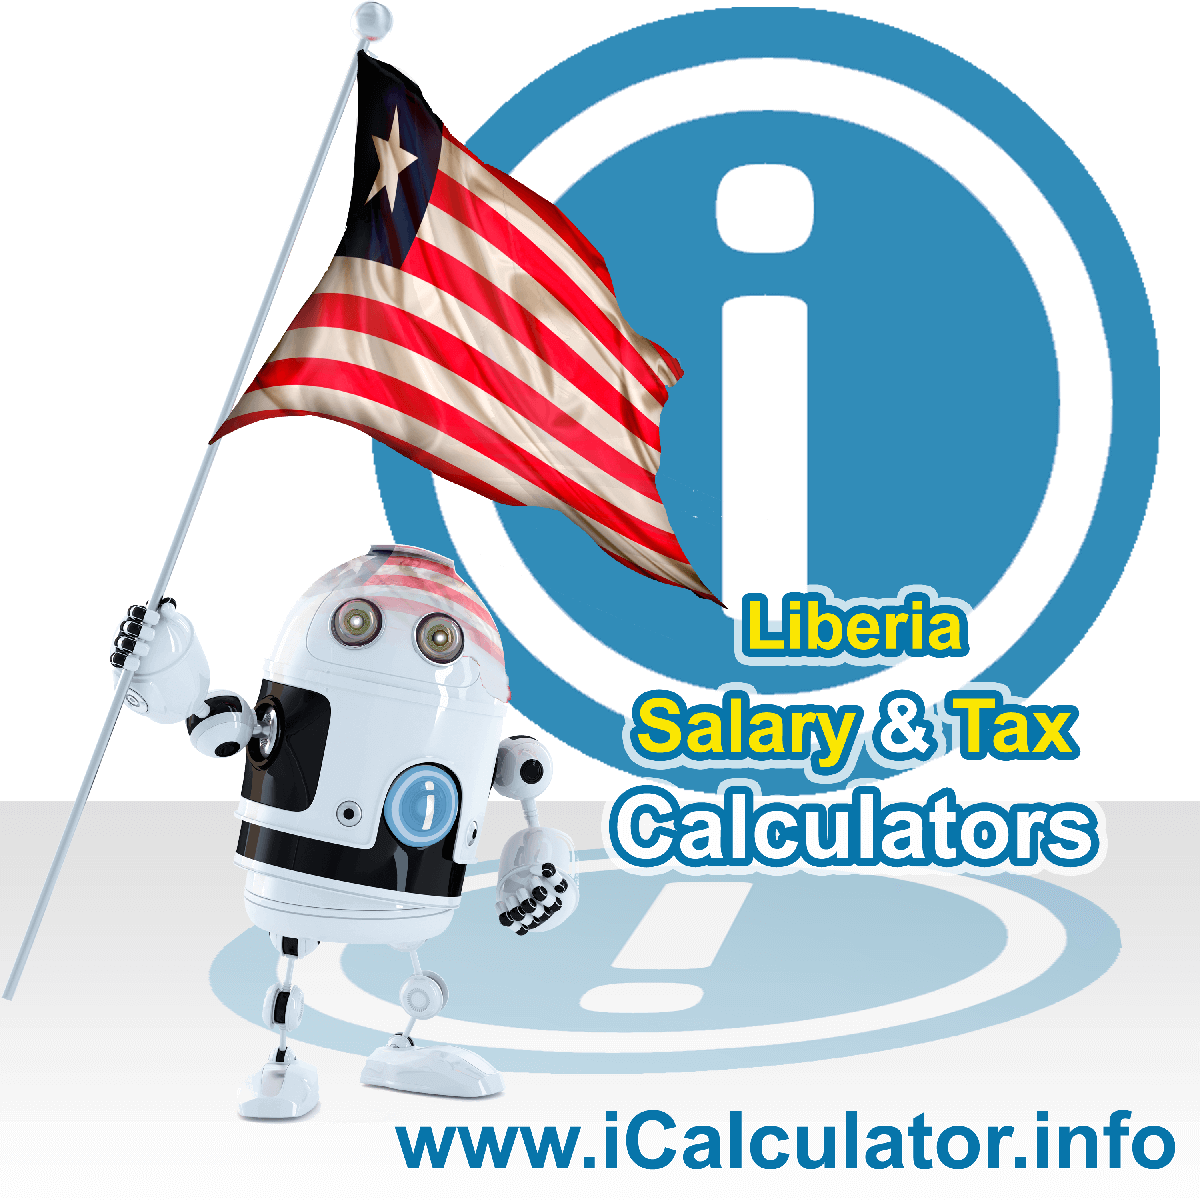 Liberia Salary Calculator. This image shows the Liberiaese flag and information relating to the tax formula for the Liberia Tax Calculator